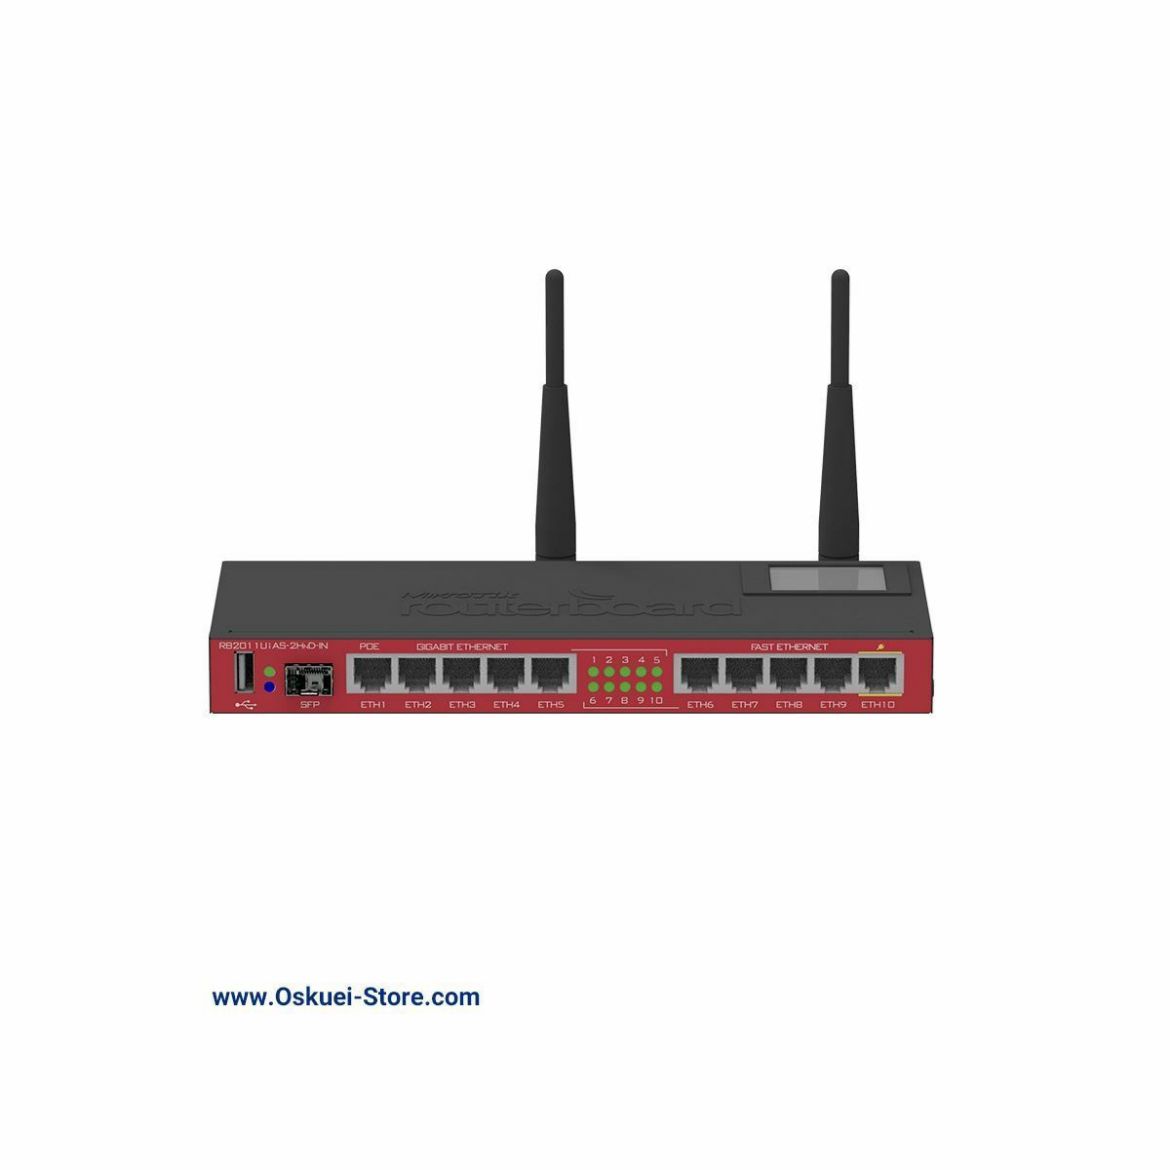 MikroTik RB2011UiAS-2HnD-IN Wireless Router Front